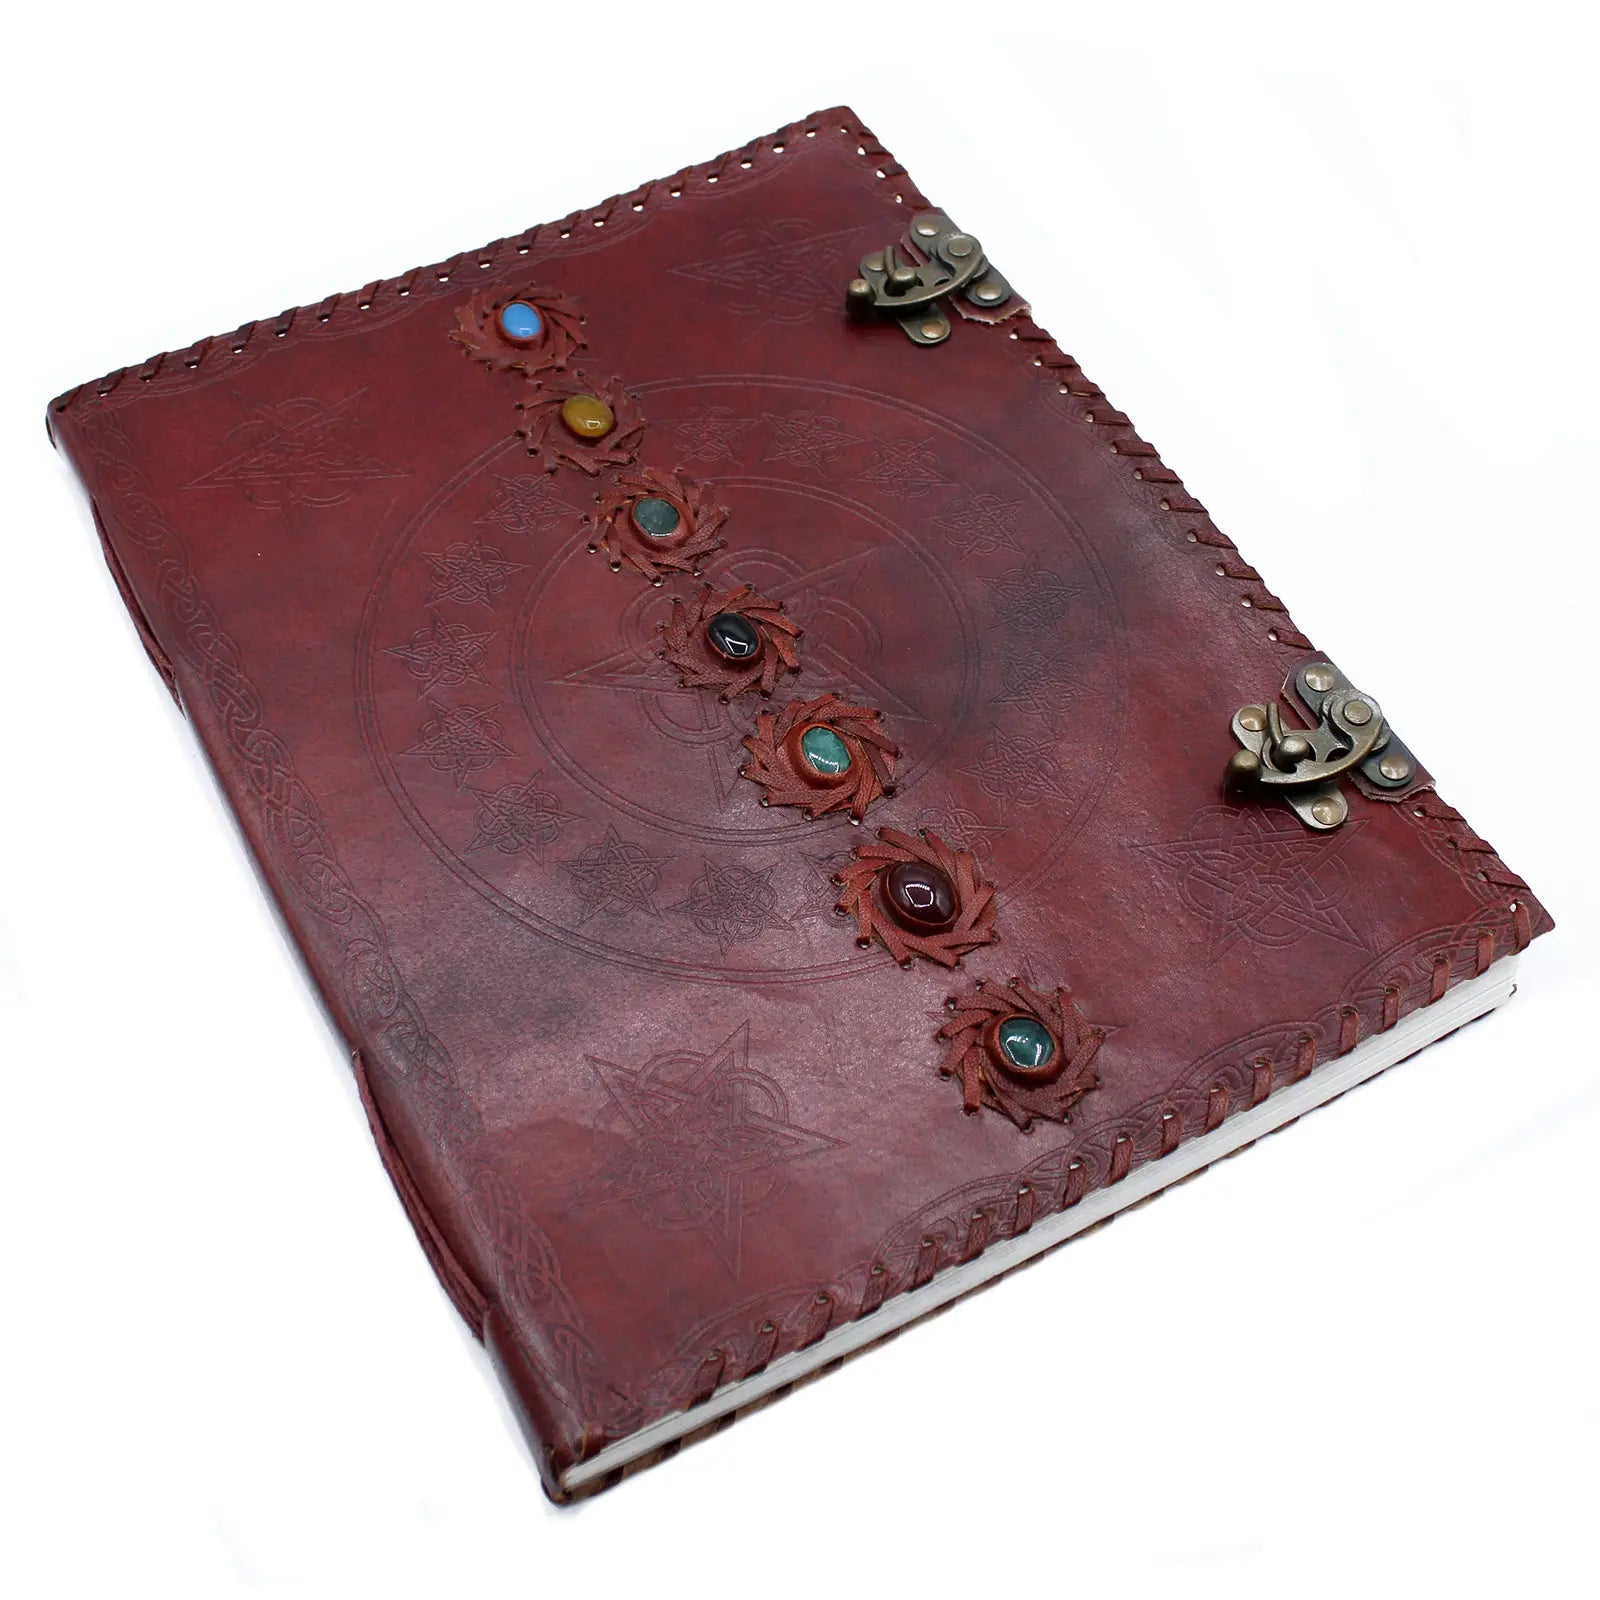 Huge 7 Chakra Leather Book - 10x13" (200 pages) ancient wisdom faire